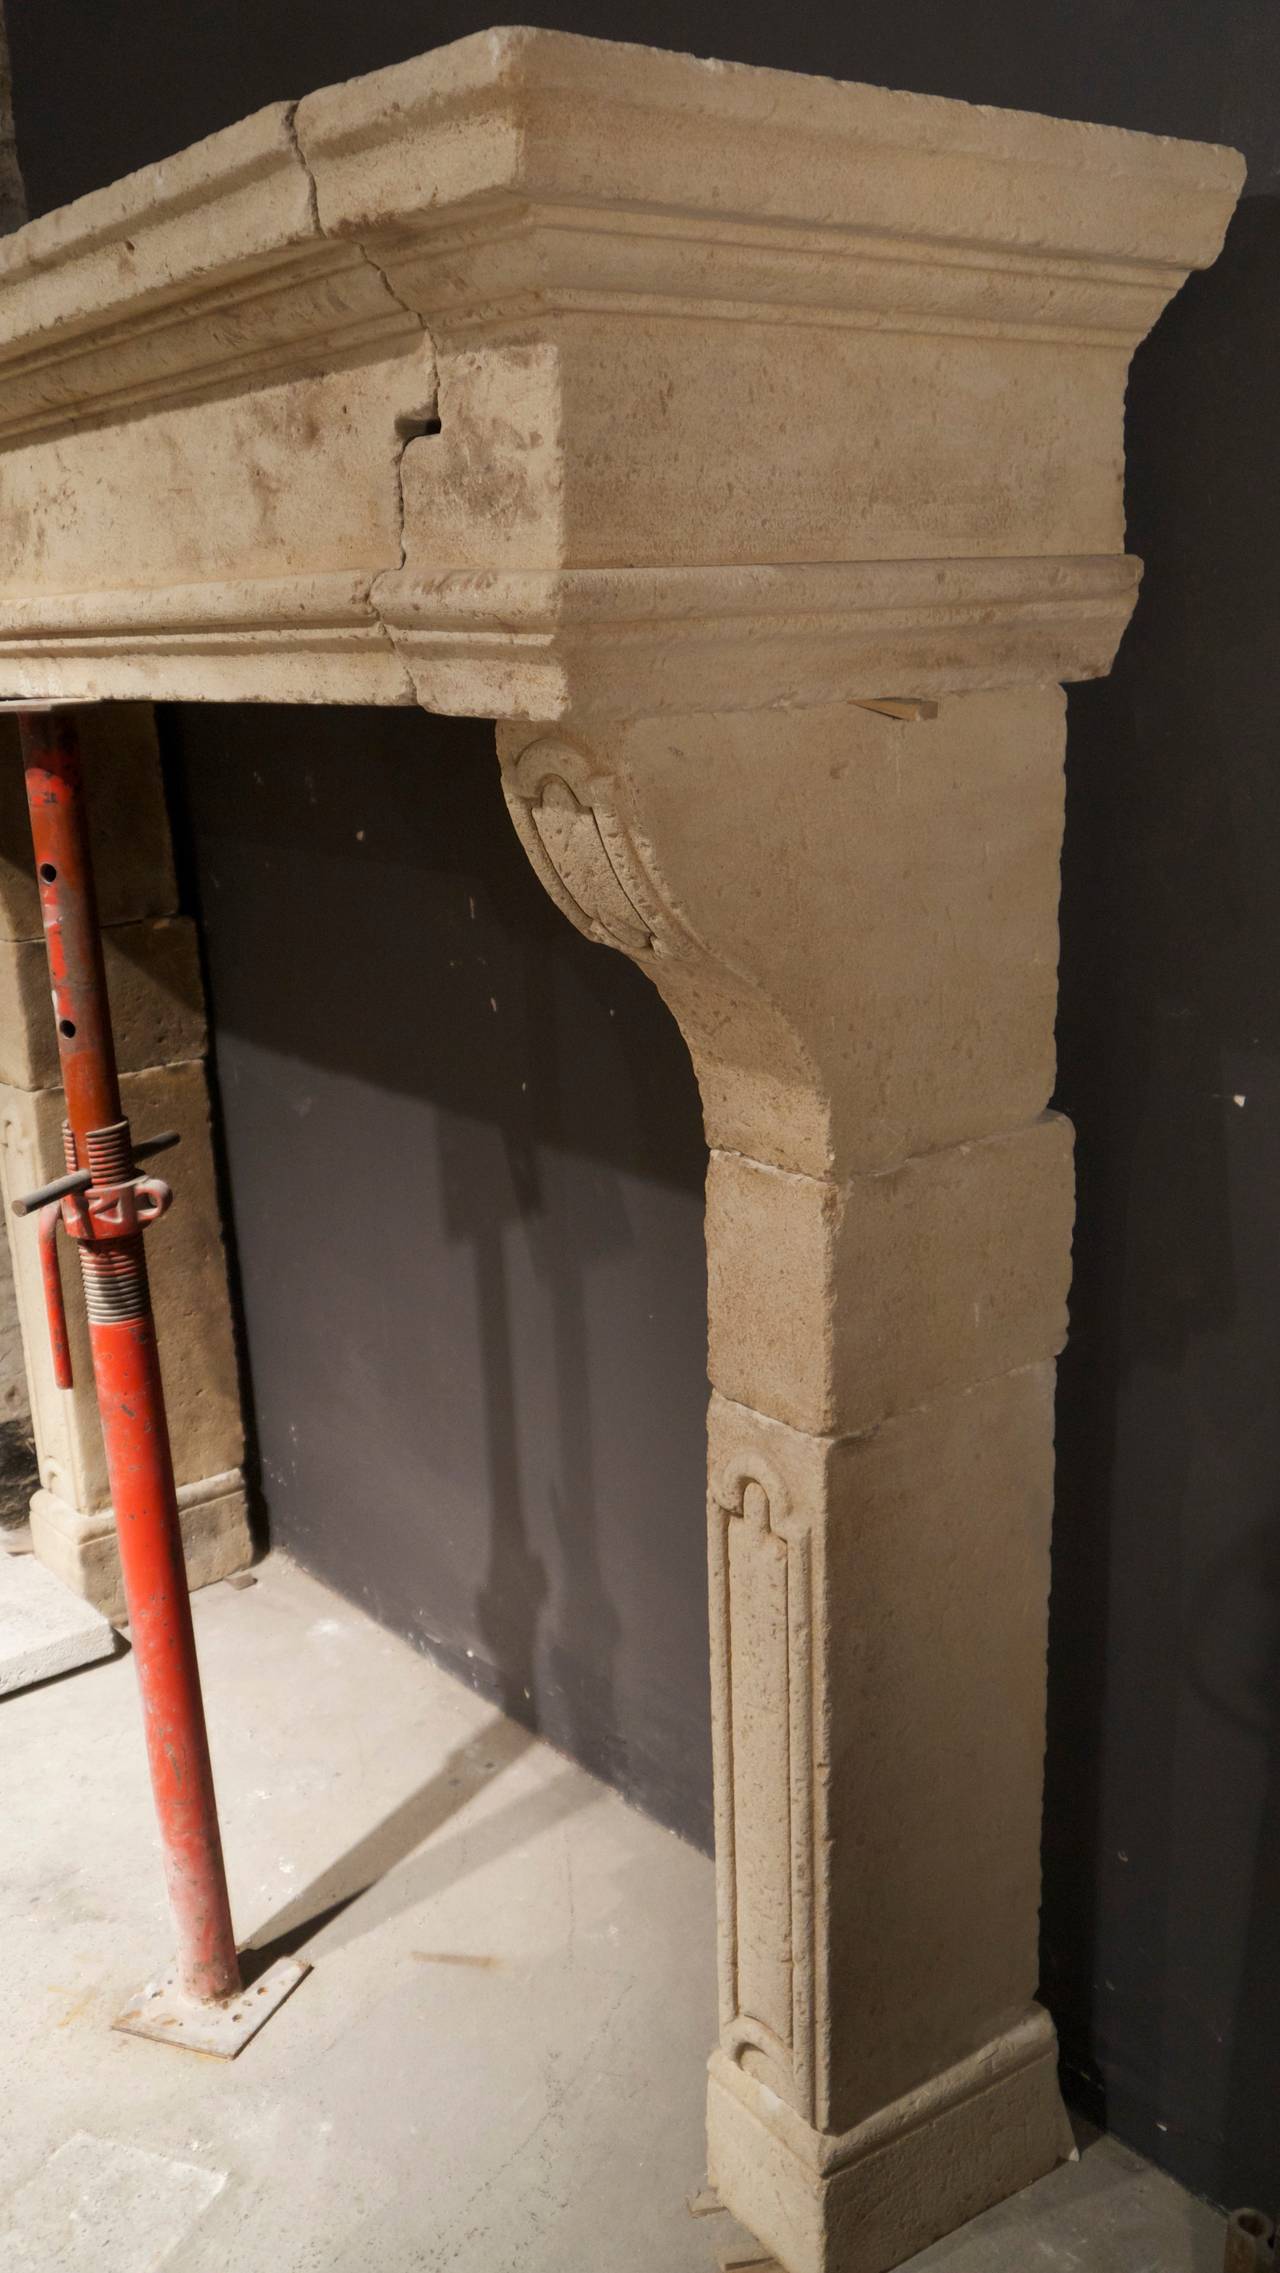 Late 18th century French Caen stone surround from the Northern region of France. In a very good condition, circa 1780.